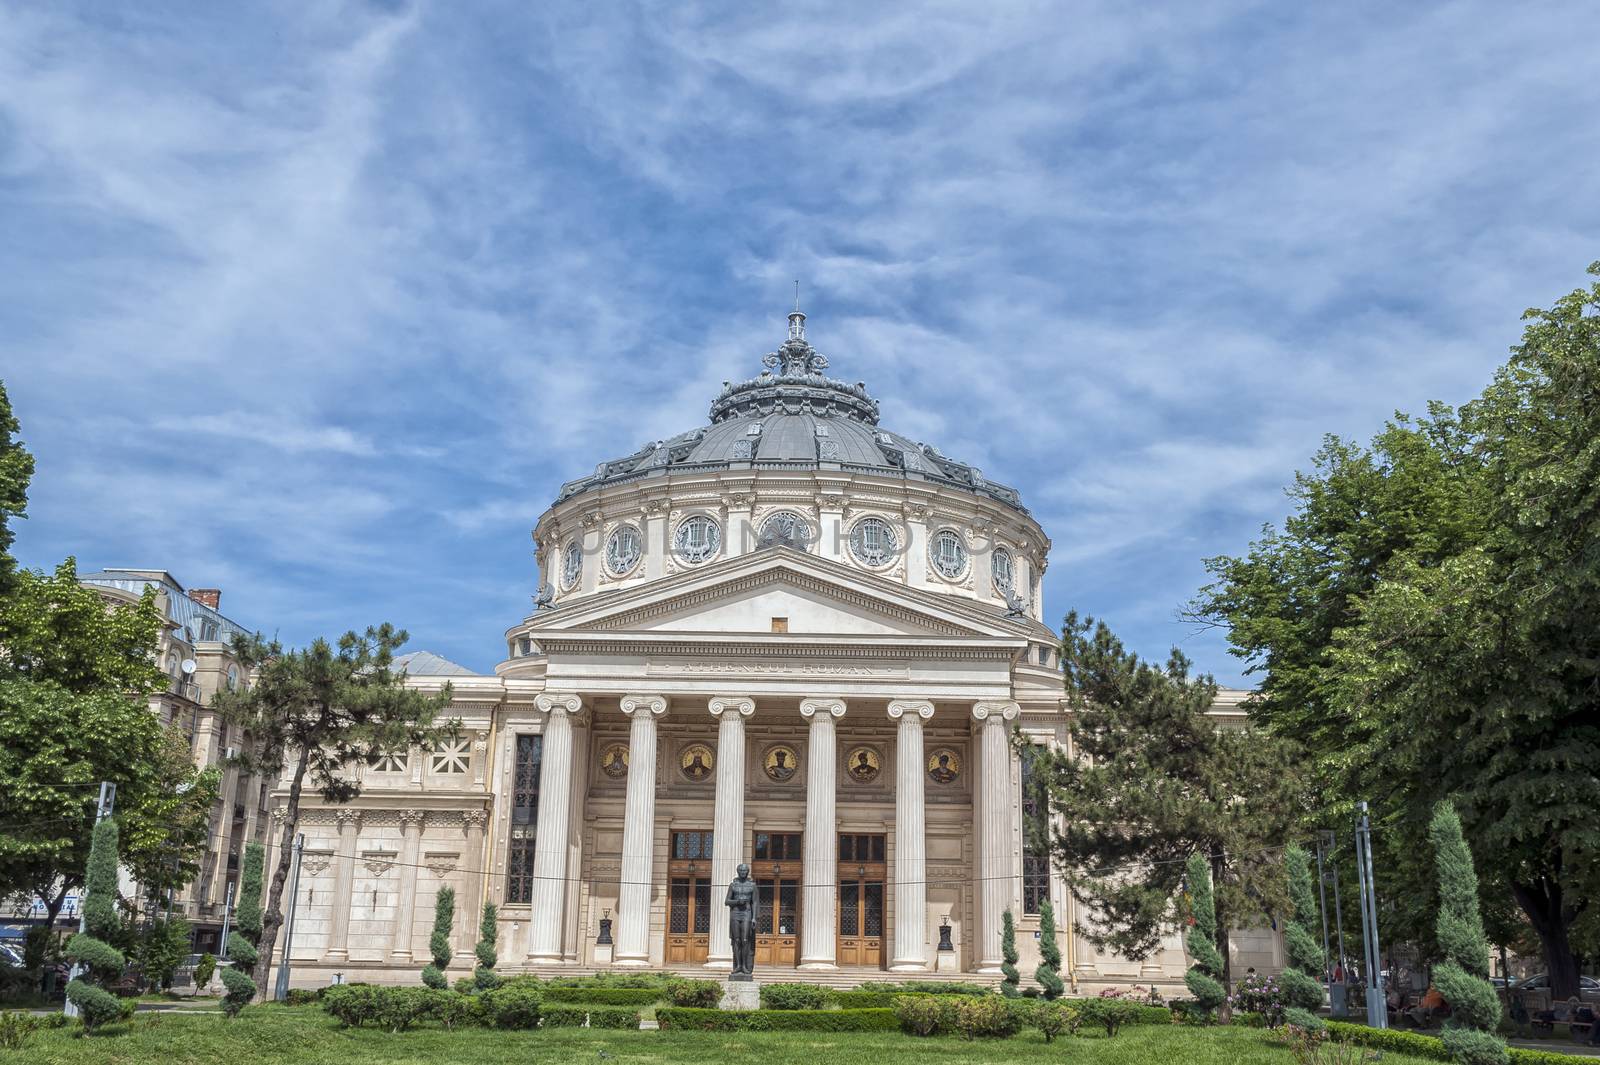 BUCHAREST, ROMANIA - MAY 09: The Romanian Athenaeum on May 09, 2013 in Bucharest, Romania. Opened in 1888 it is a concert hall in the center of Bucharest and a landmark of the Romanian capital city.